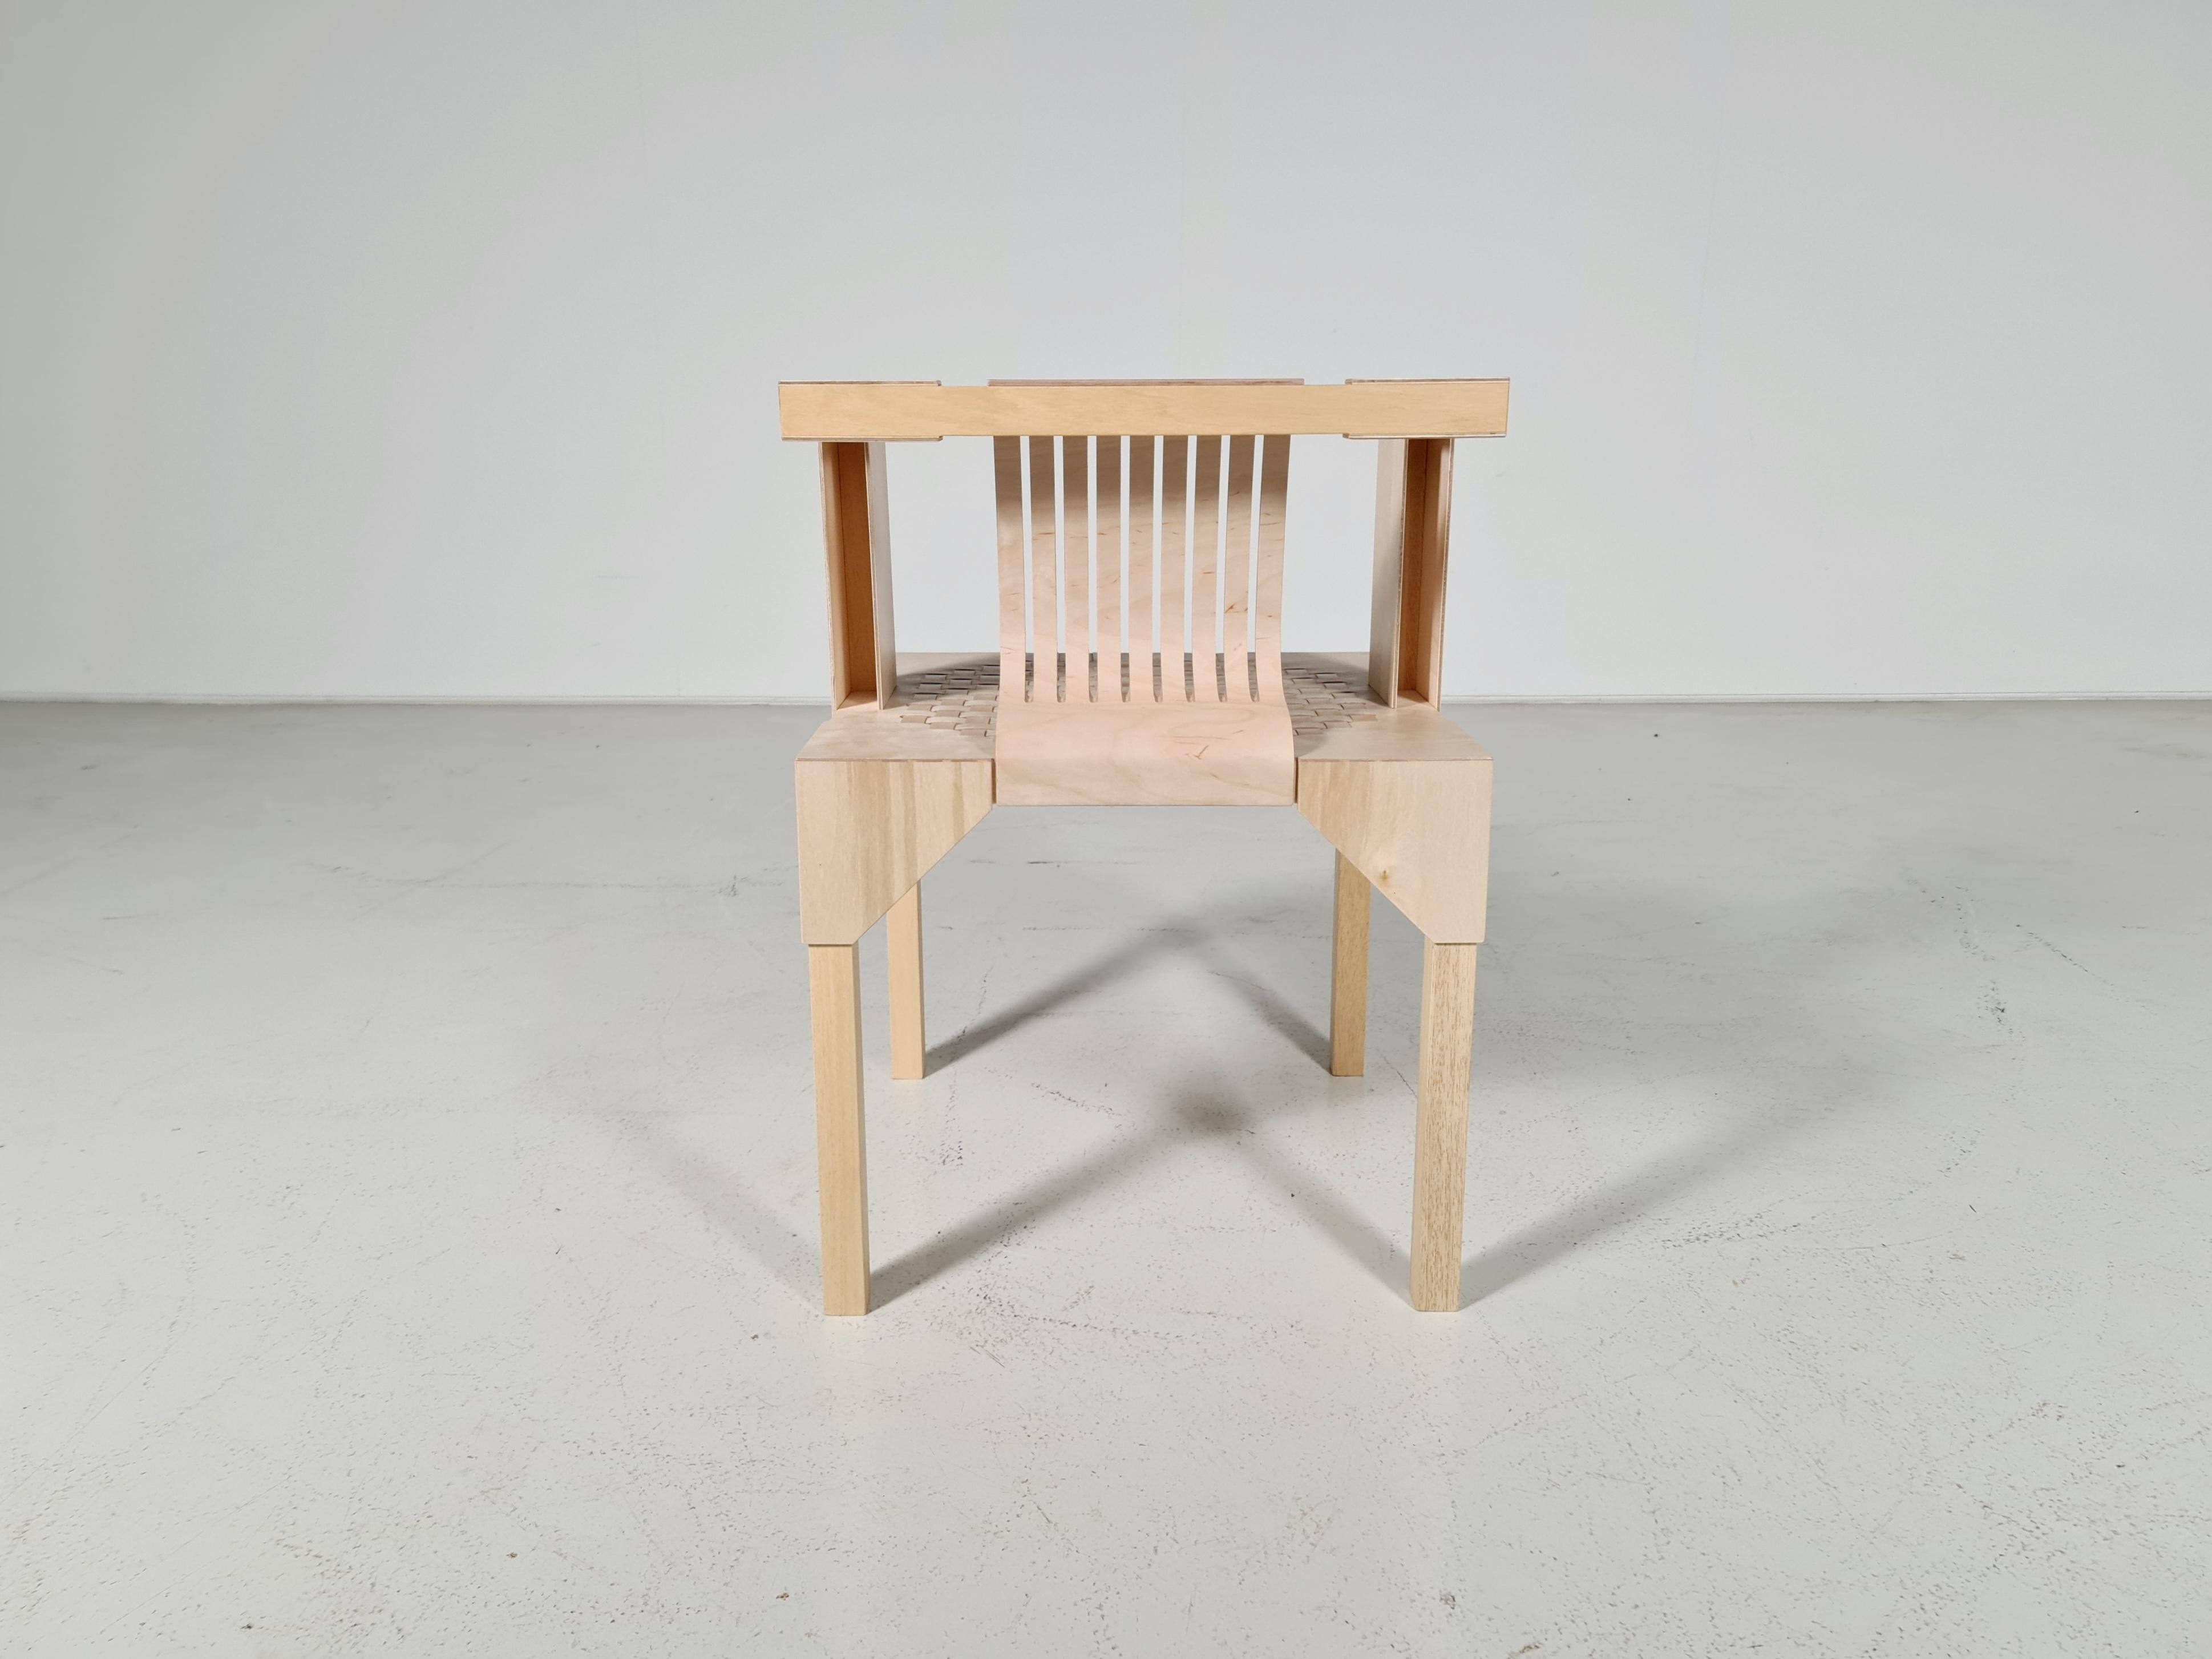 Re-edition of the Chair 40, Ruud Jan Kokke, the Netherlands, 1990. Unlimited quantities to order.

Made of birch and magnolia wood. On the frame, he applied wickerwork of thin but very strong aircraft plywood. This ensures a pleasantly soft seat.